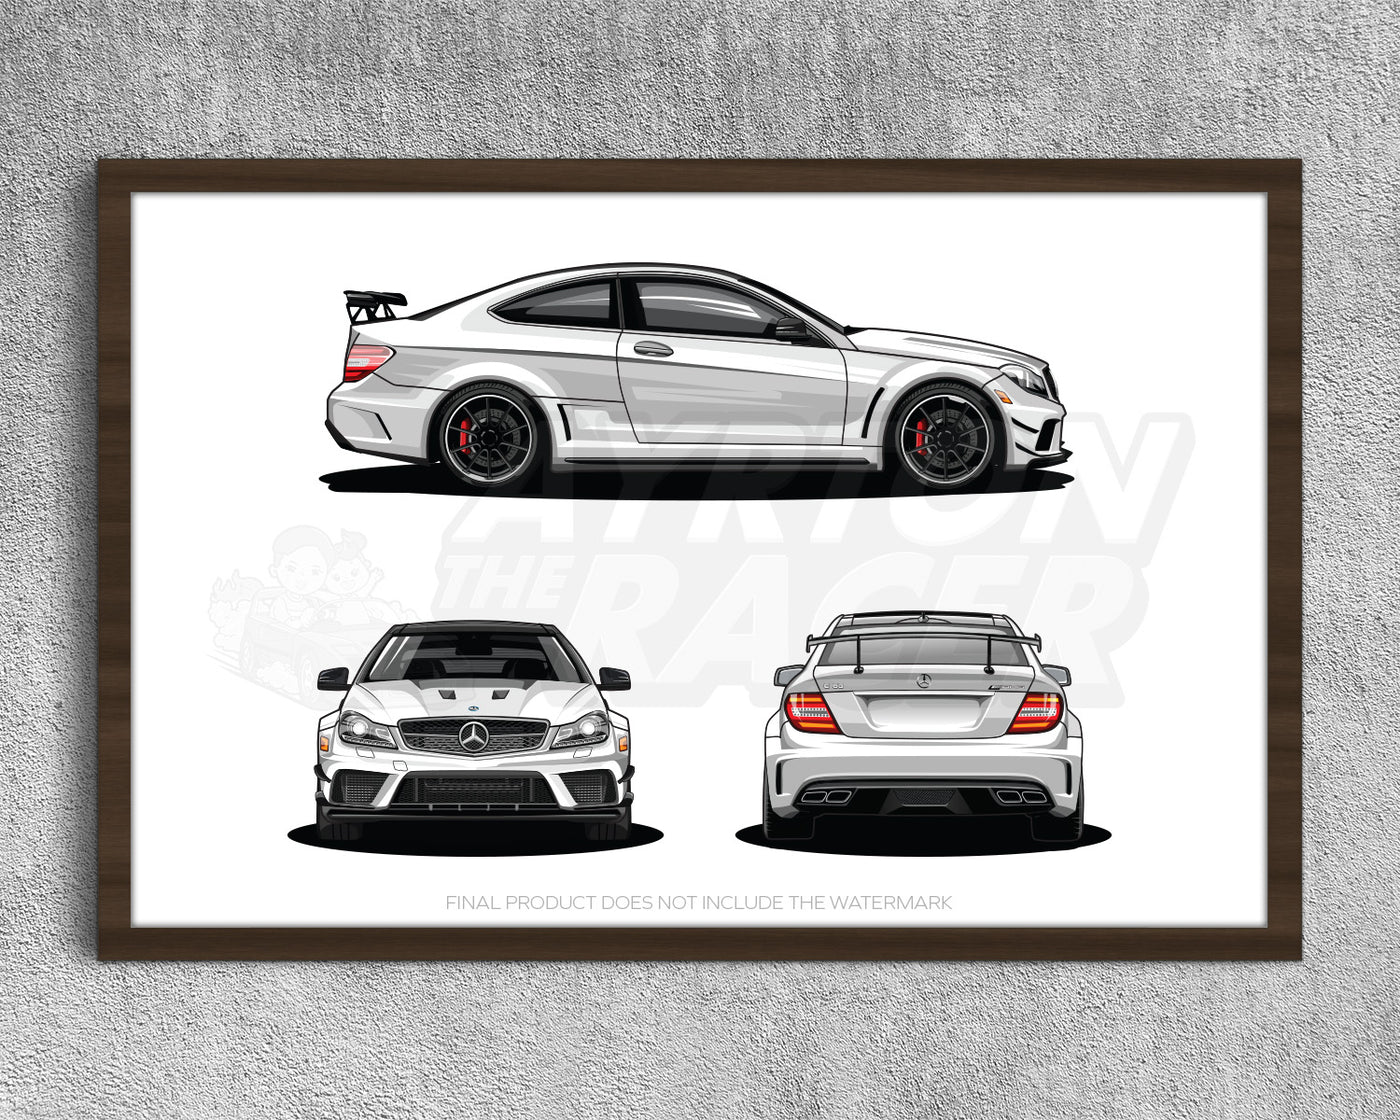 Framed Mercedes Benz AMG C63 Black Series C-Class (W204) Silver White Side Front Rear Profile Poster Wall Art